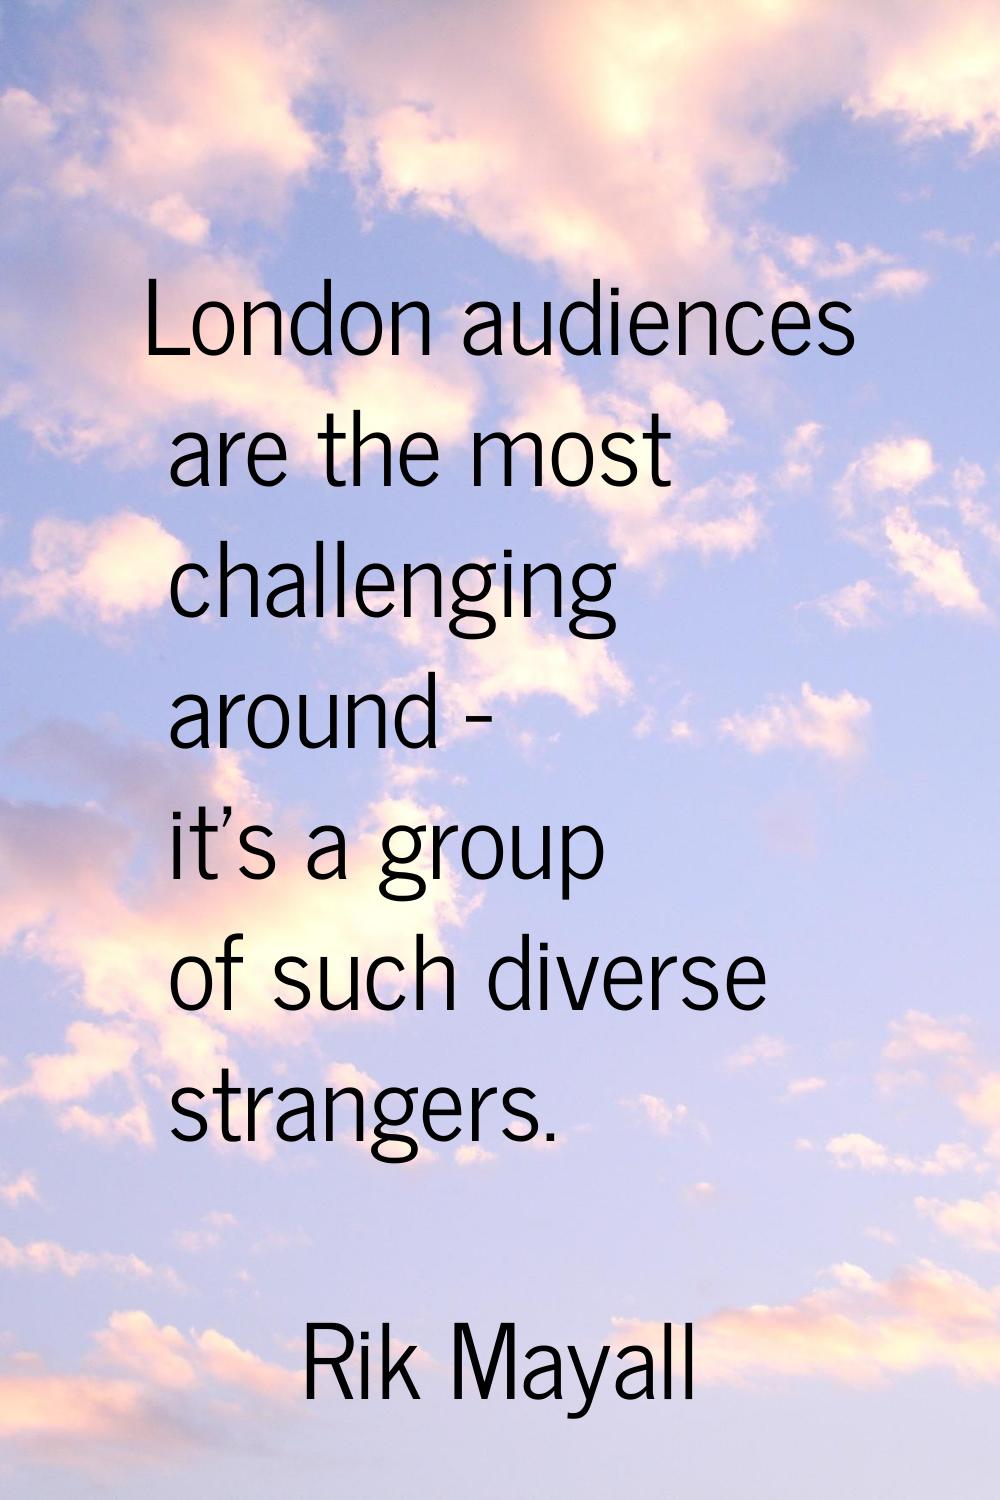 London audiences are the most challenging around - it's a group of such diverse strangers.